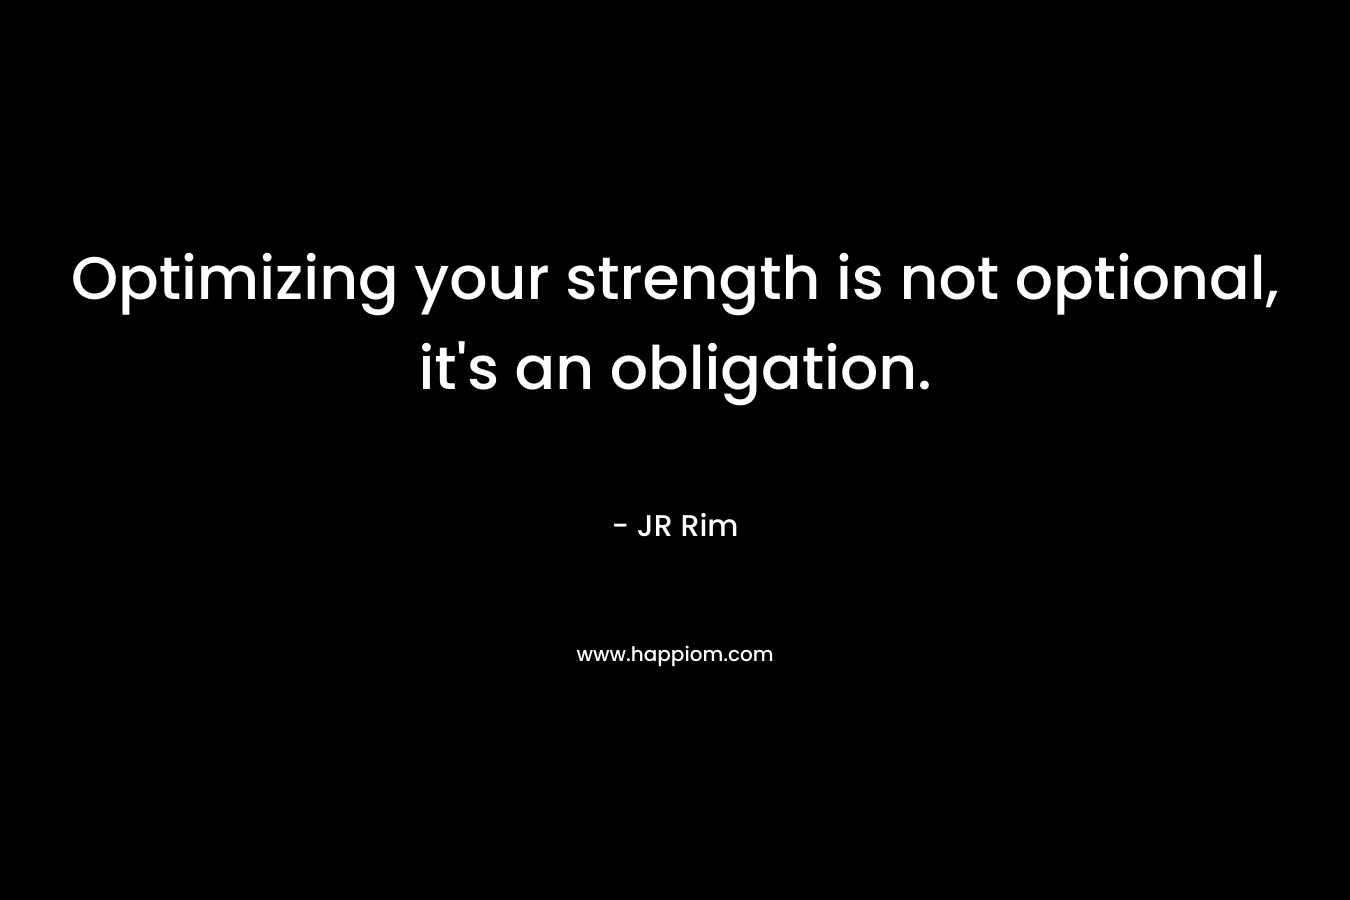 Optimizing your strength is not optional, it's an obligation.